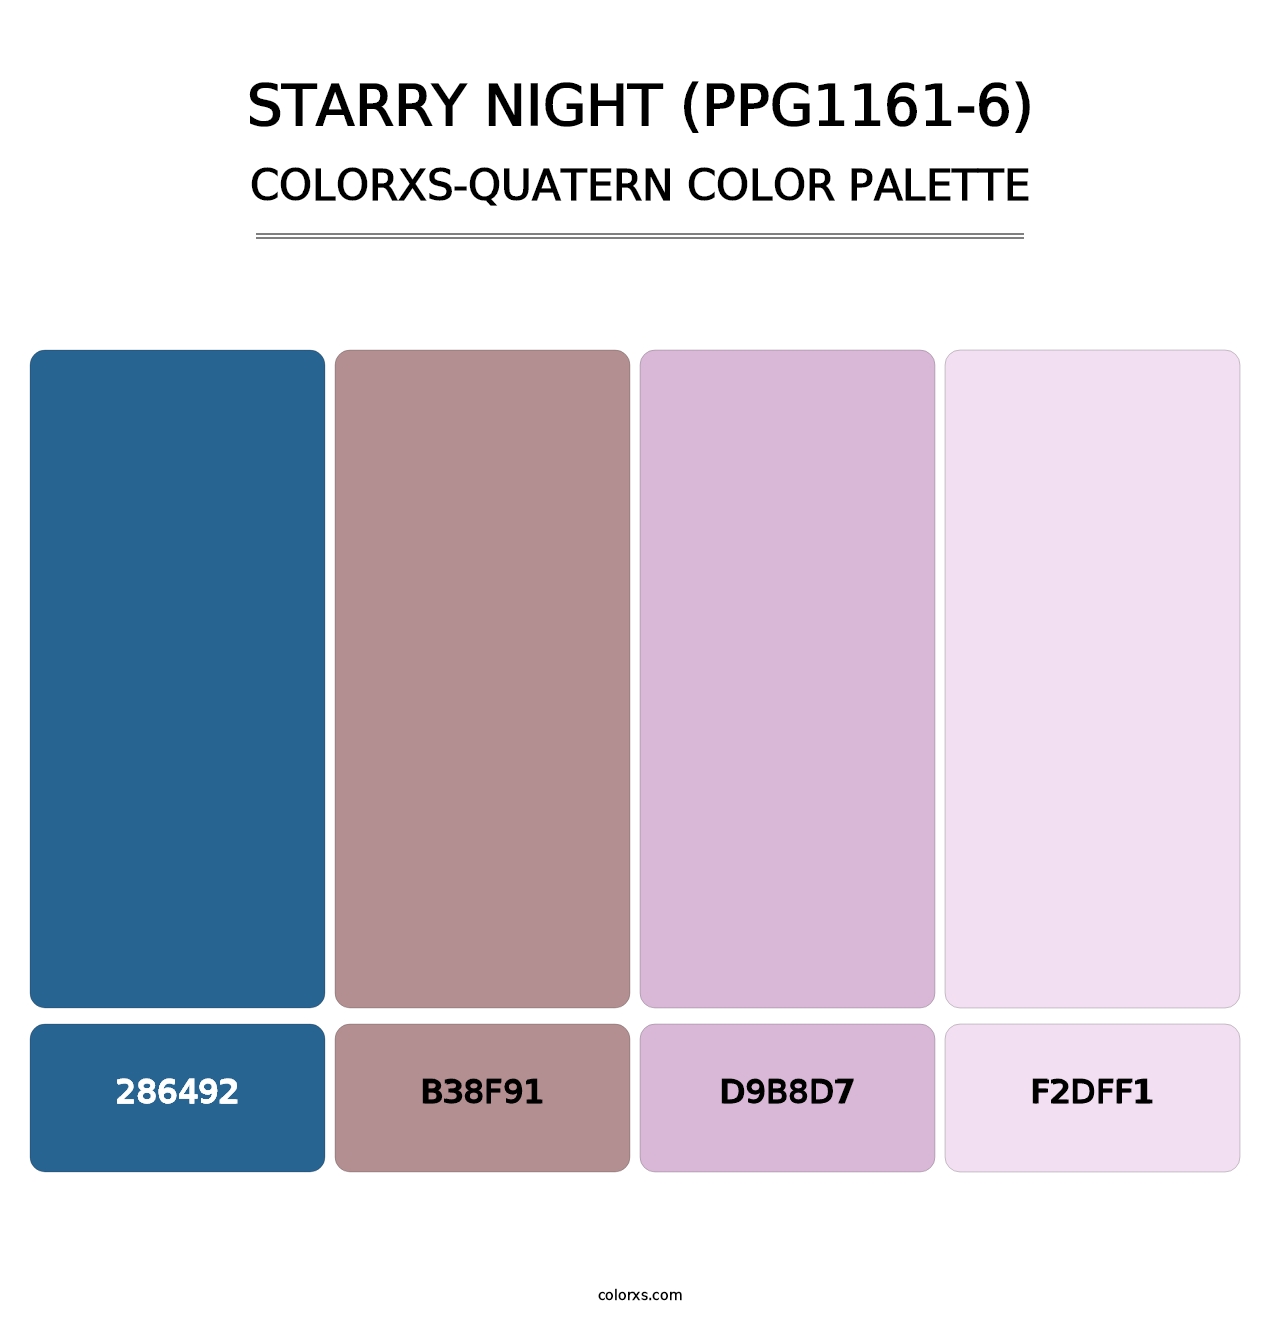 Starry Night (PPG1161-6) - Colorxs Quatern Palette